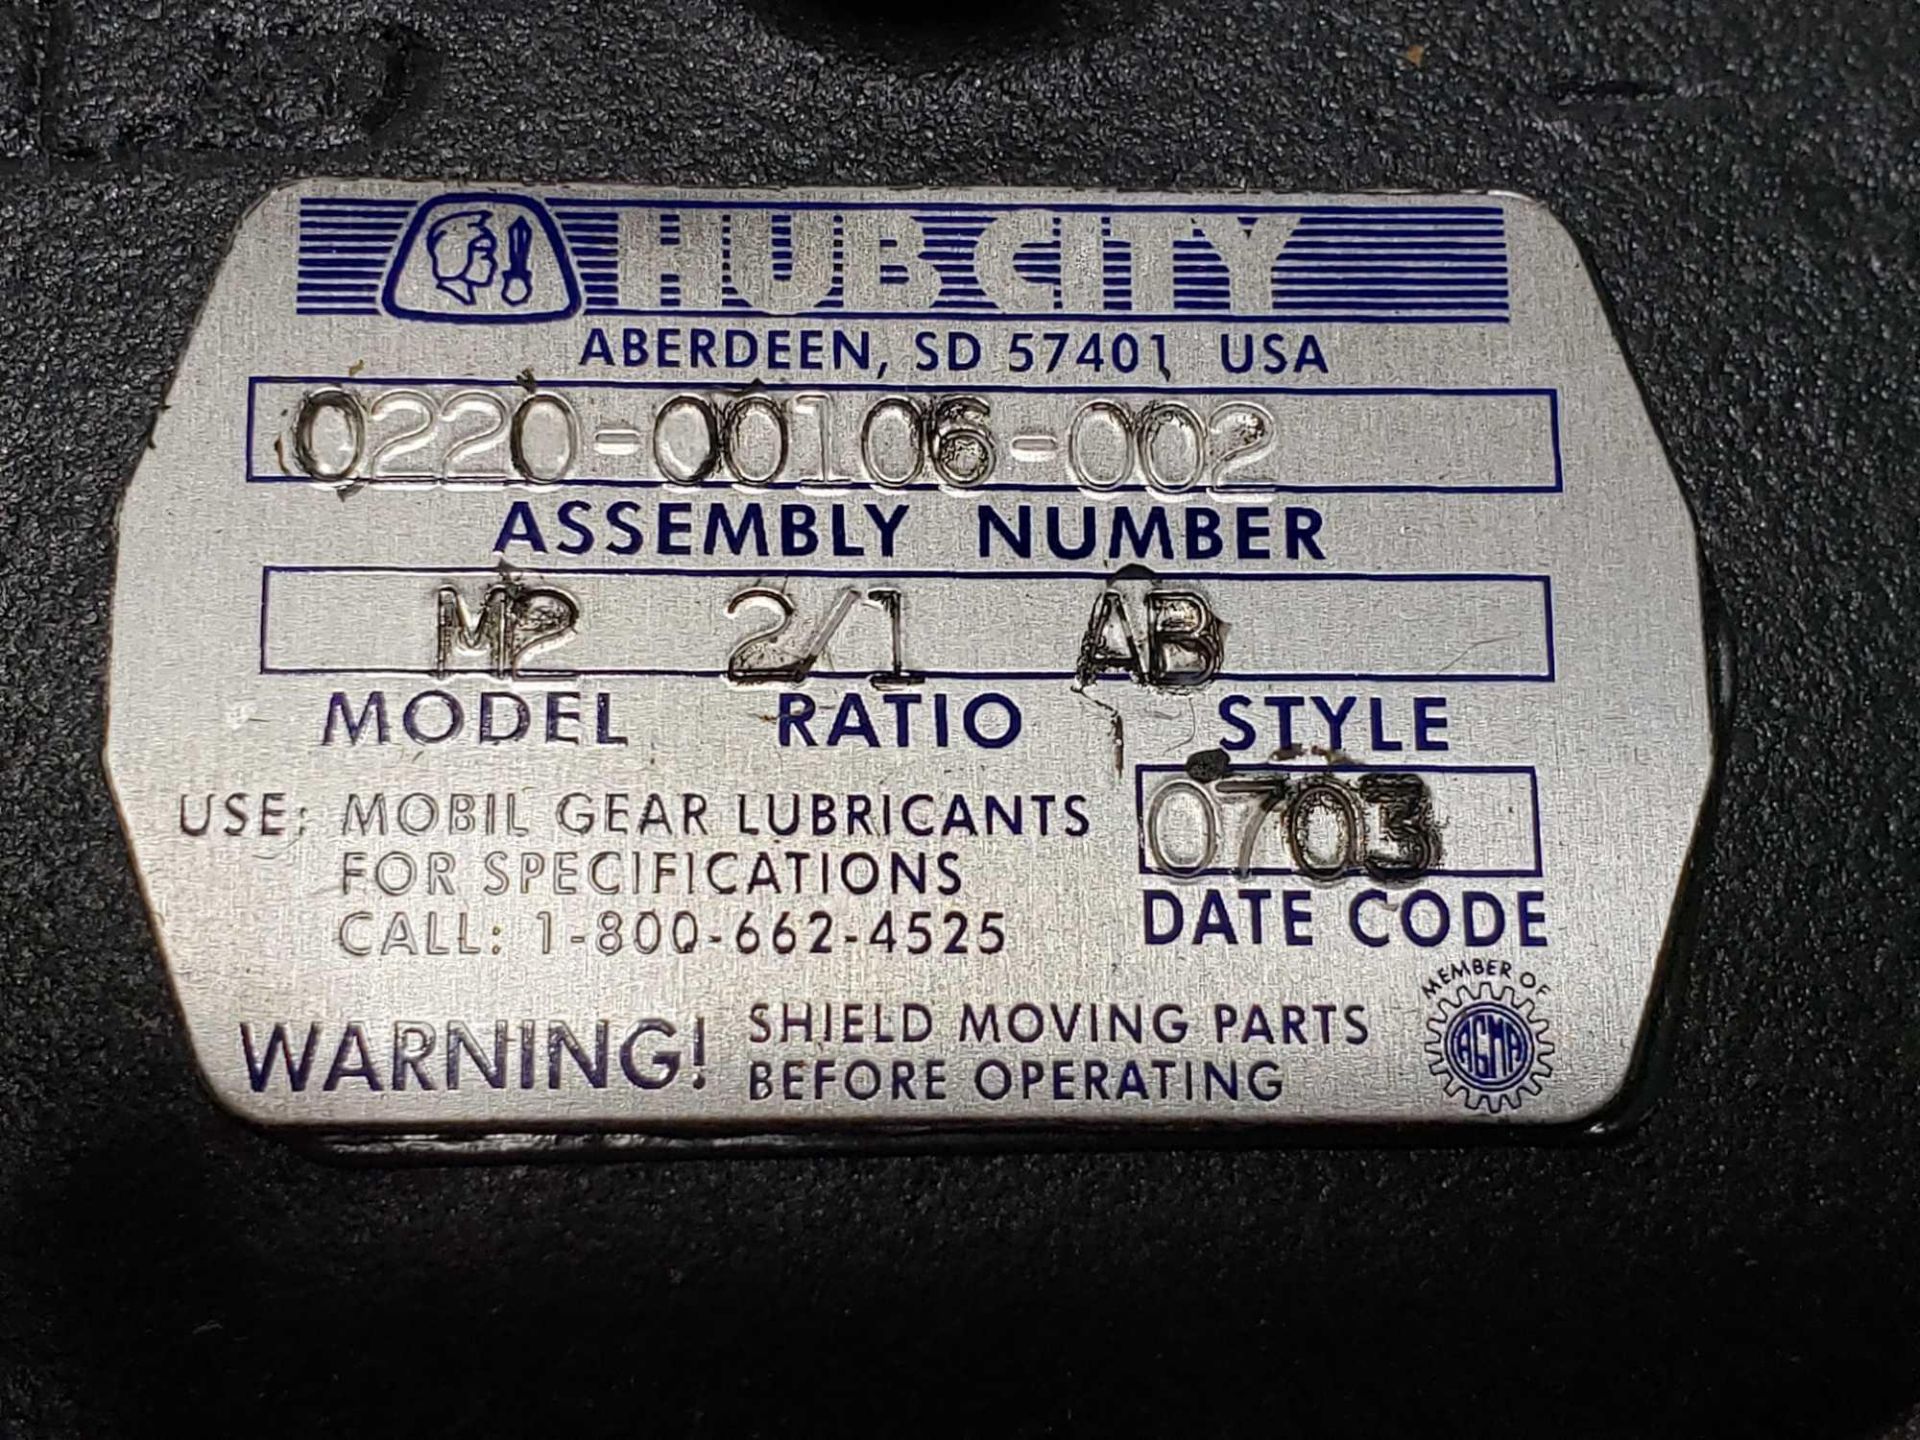 Hub City gear box speed reducer model M2, ratio 2/1, style DE. New in box. - Image 3 of 4